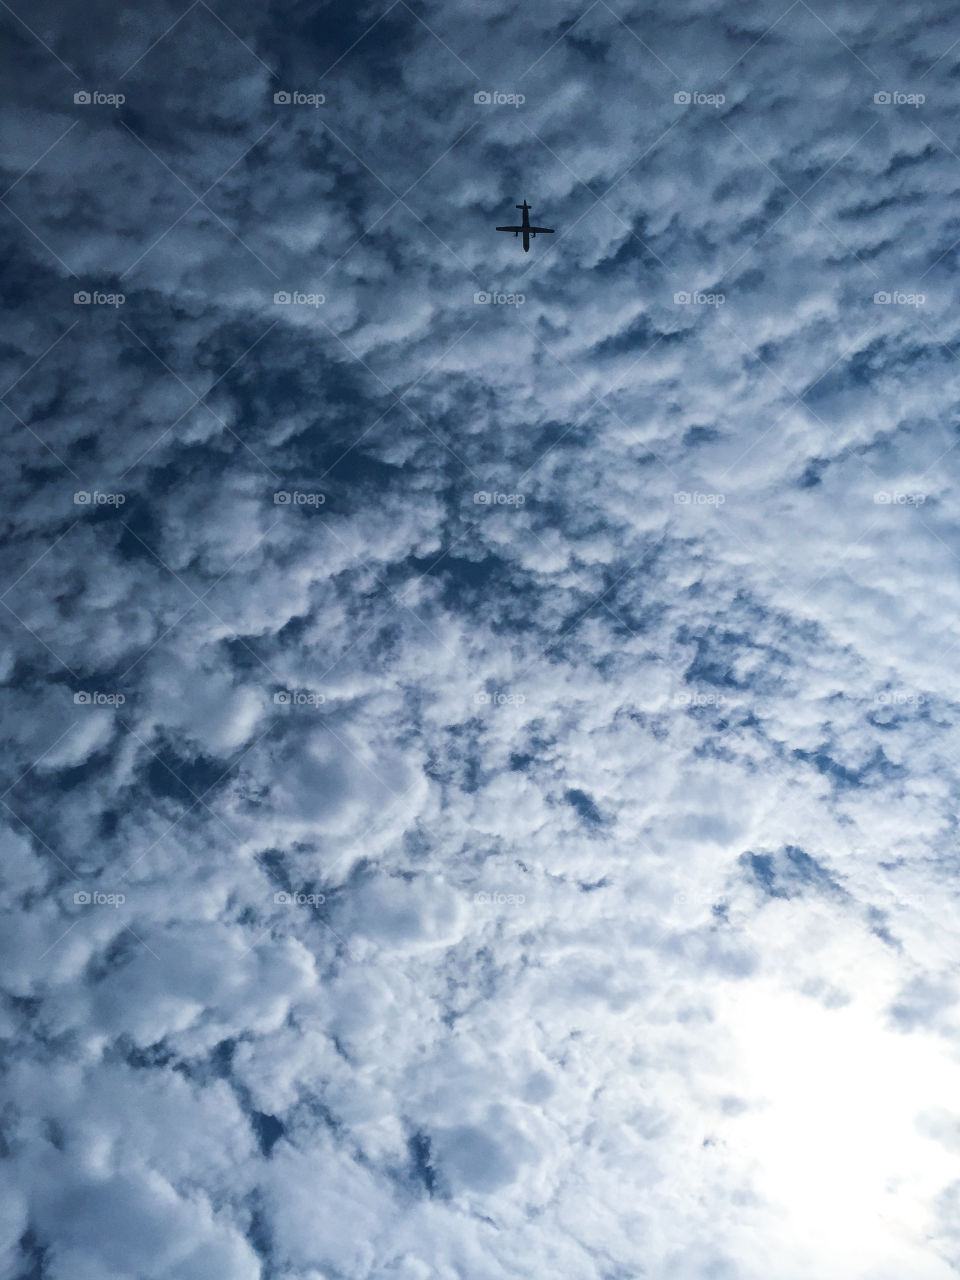 Clouds&airplane in the sky. Atmosphere blue sky 